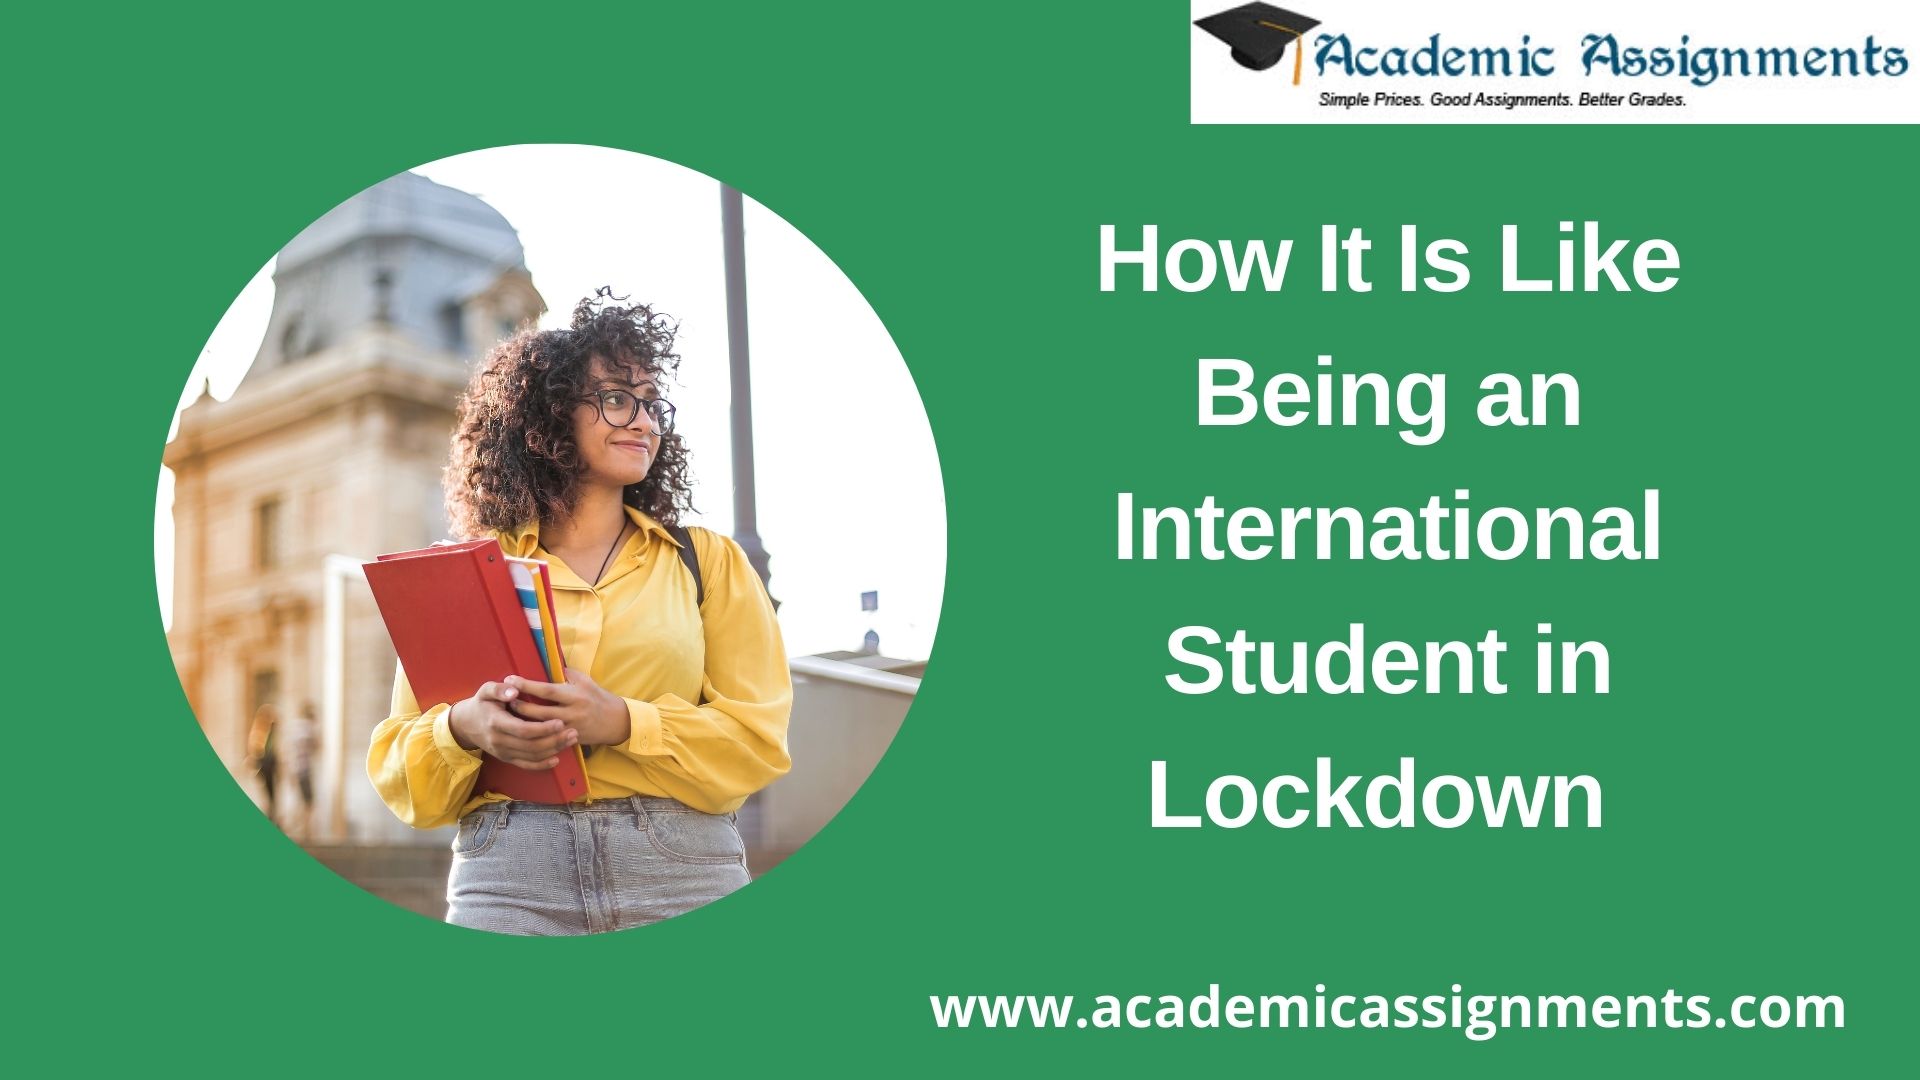 How It Is Like Being an International Student in Lockdown